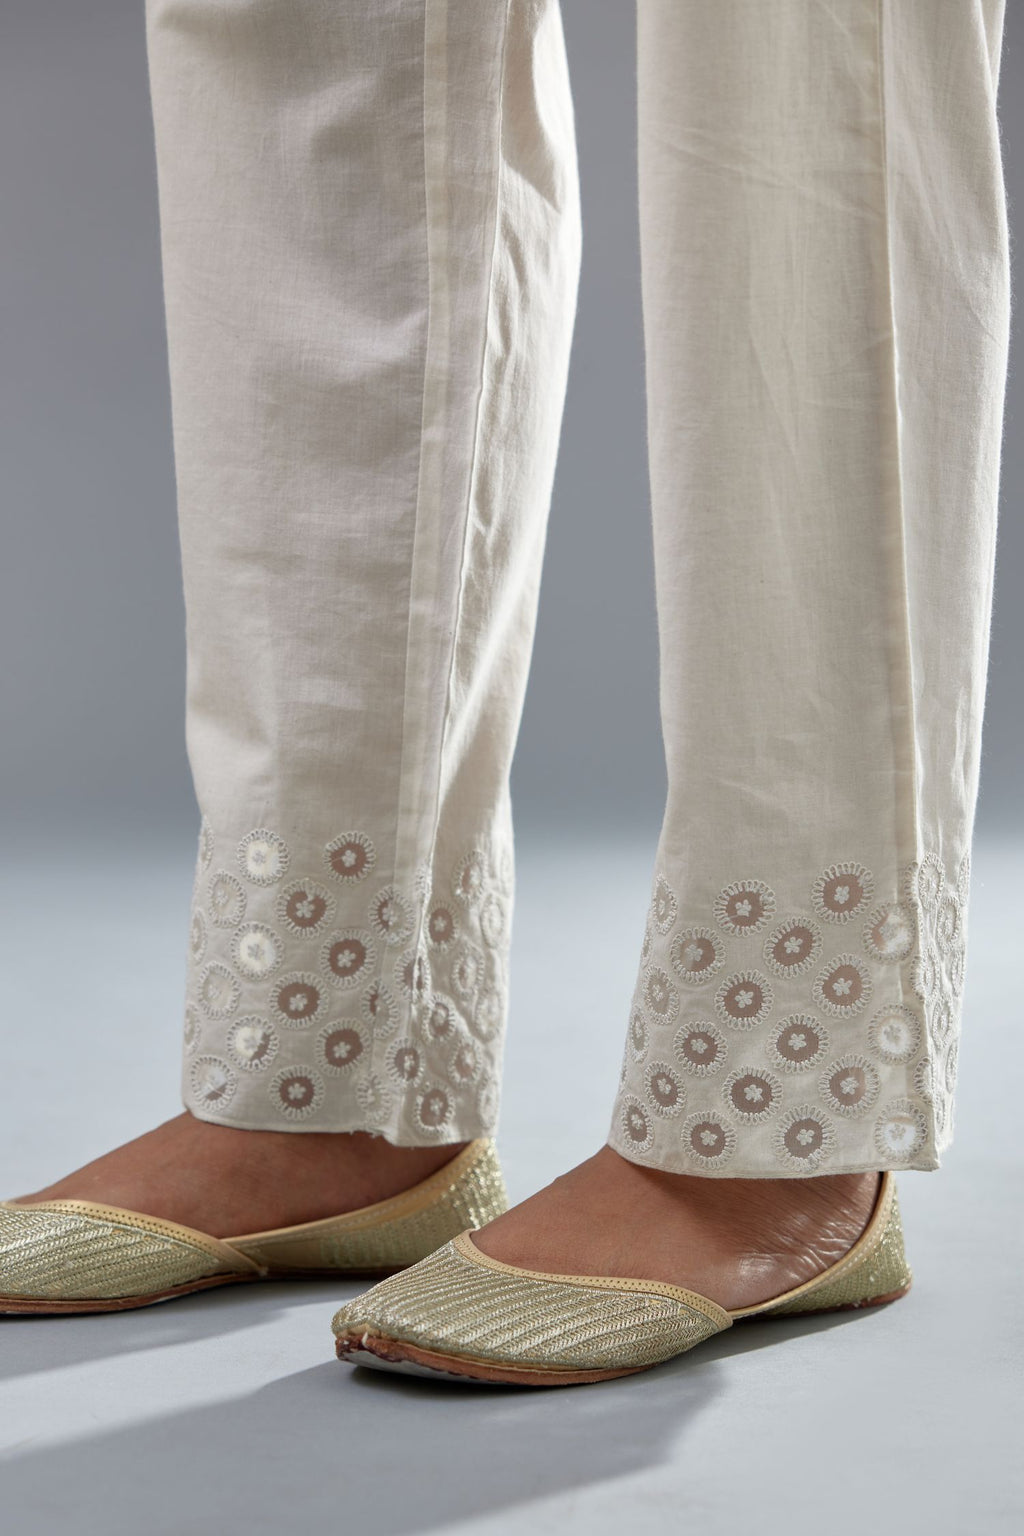 Off white cotton straight pants with appliqué and dori embroidery work at bottom hem.